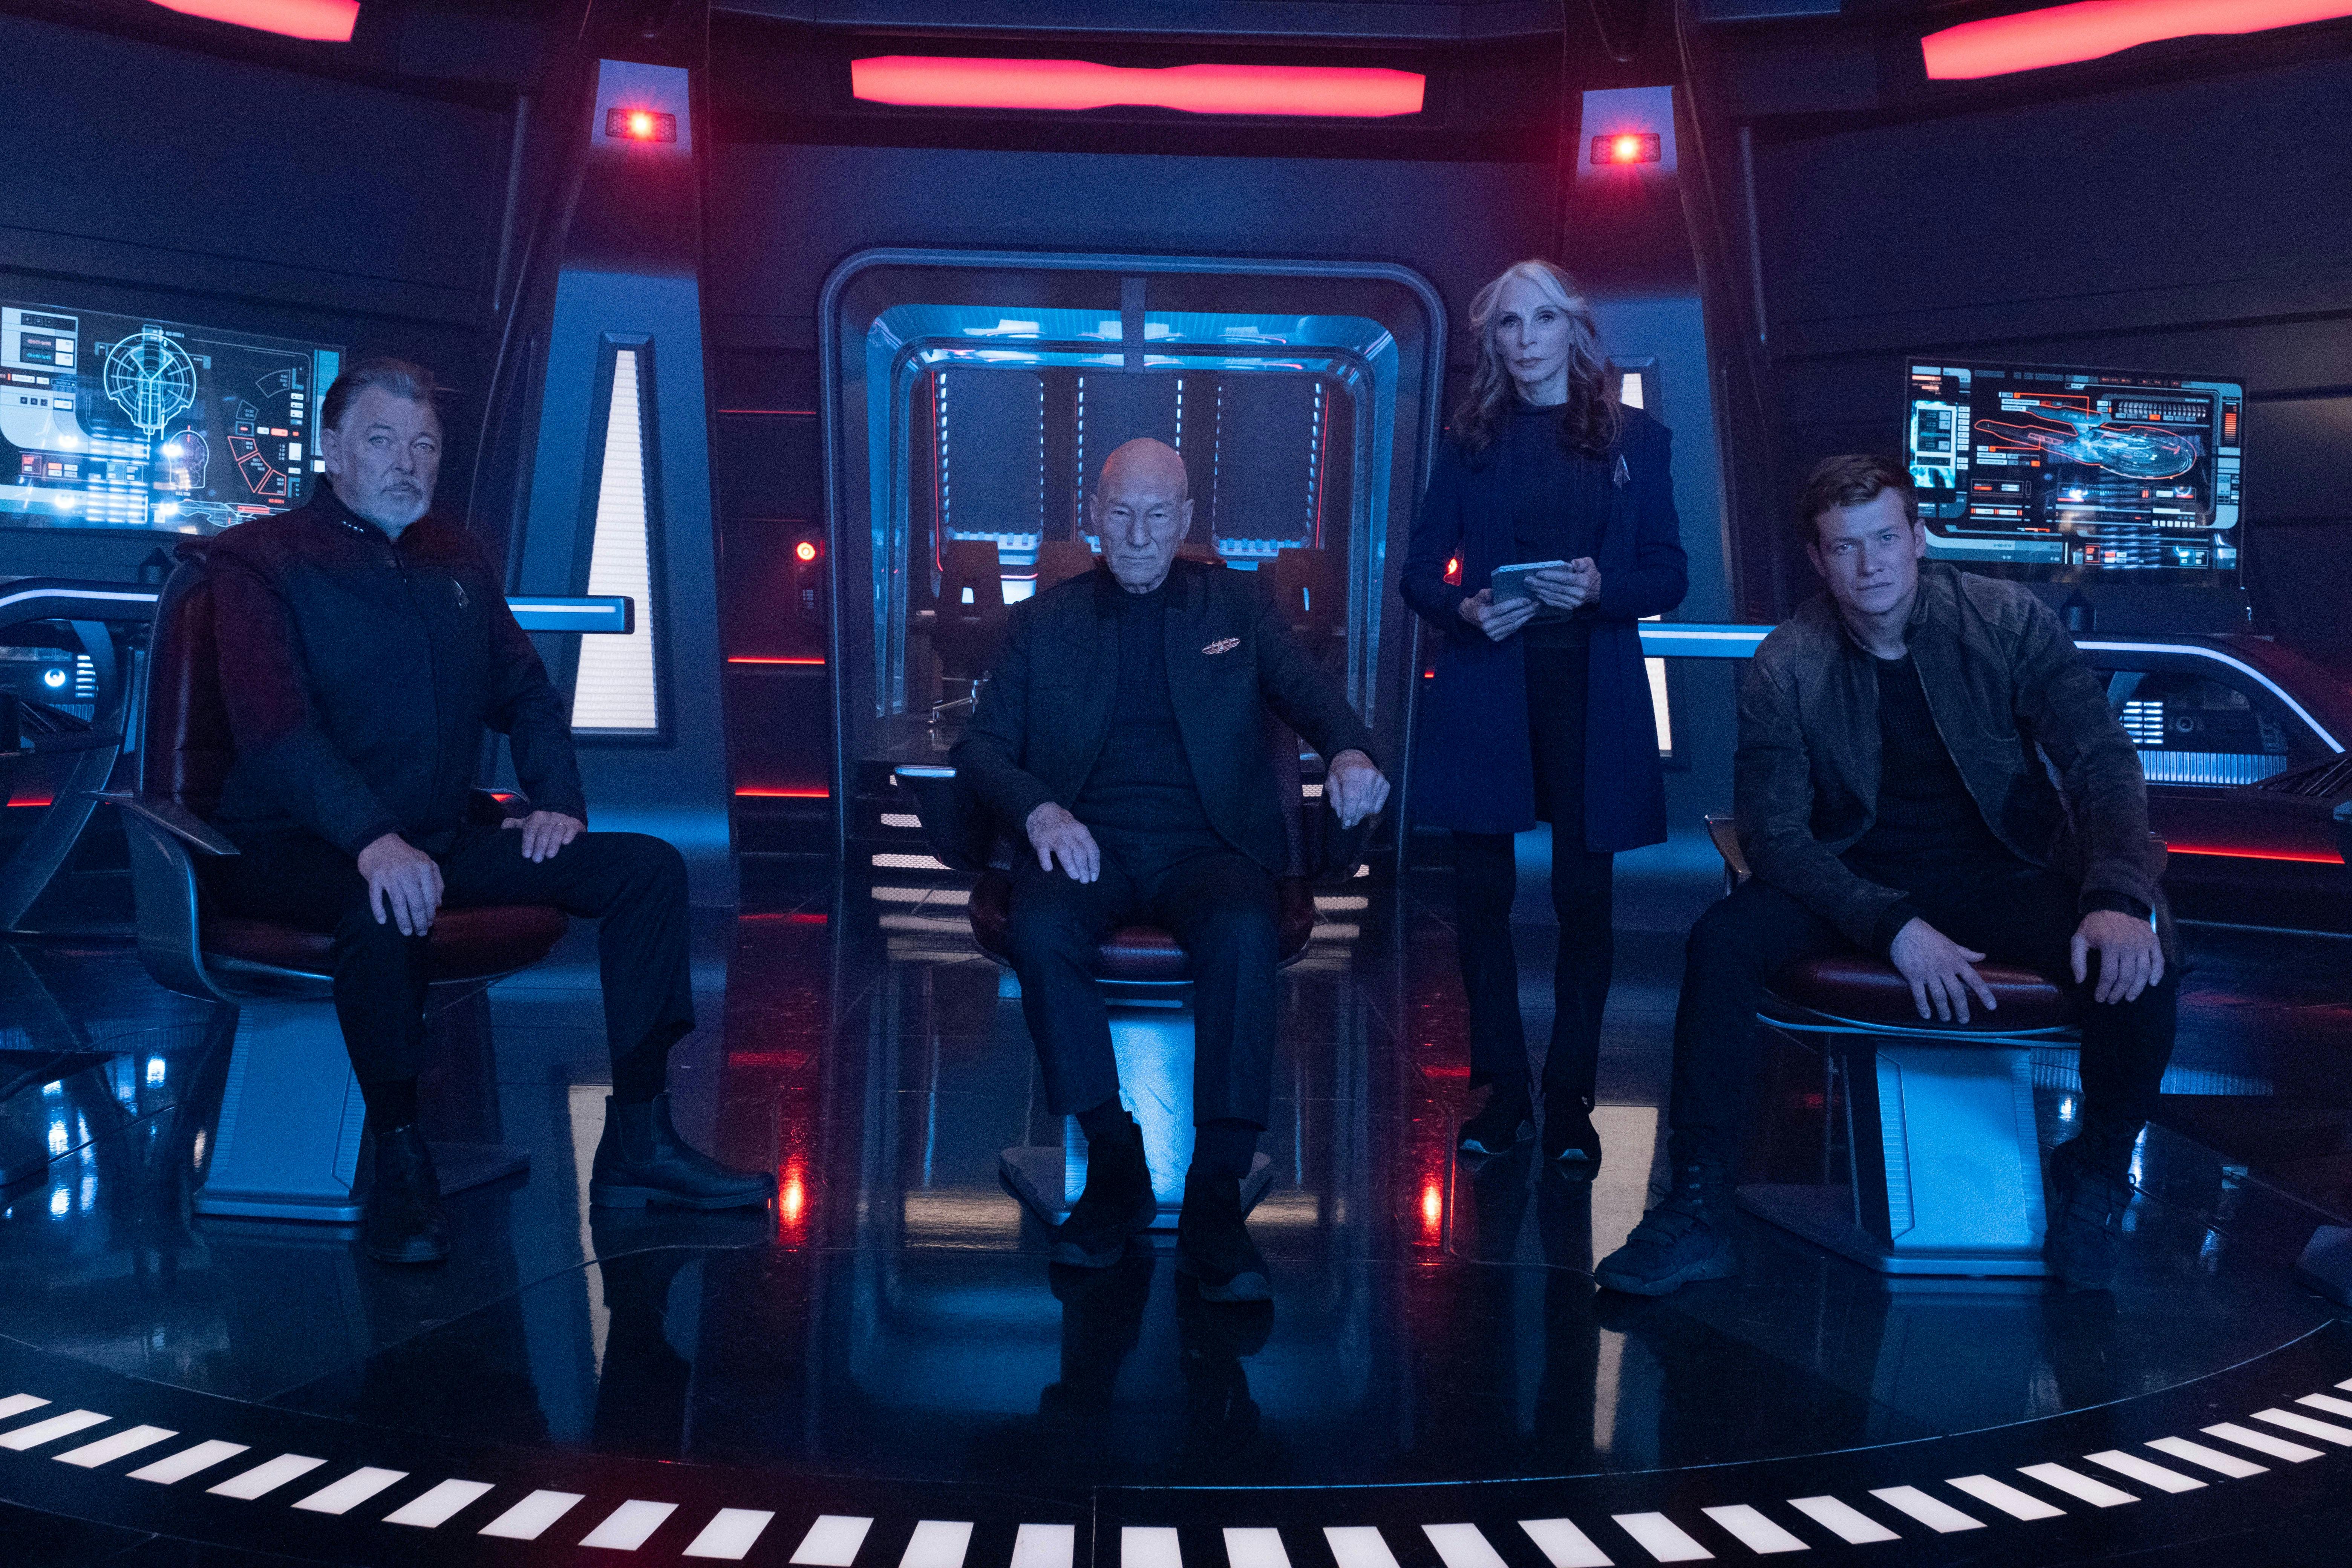 Will Riker, Jean-Luc Picard, Beverly Crusher, and Jack Crusher at command of the Titan bridge